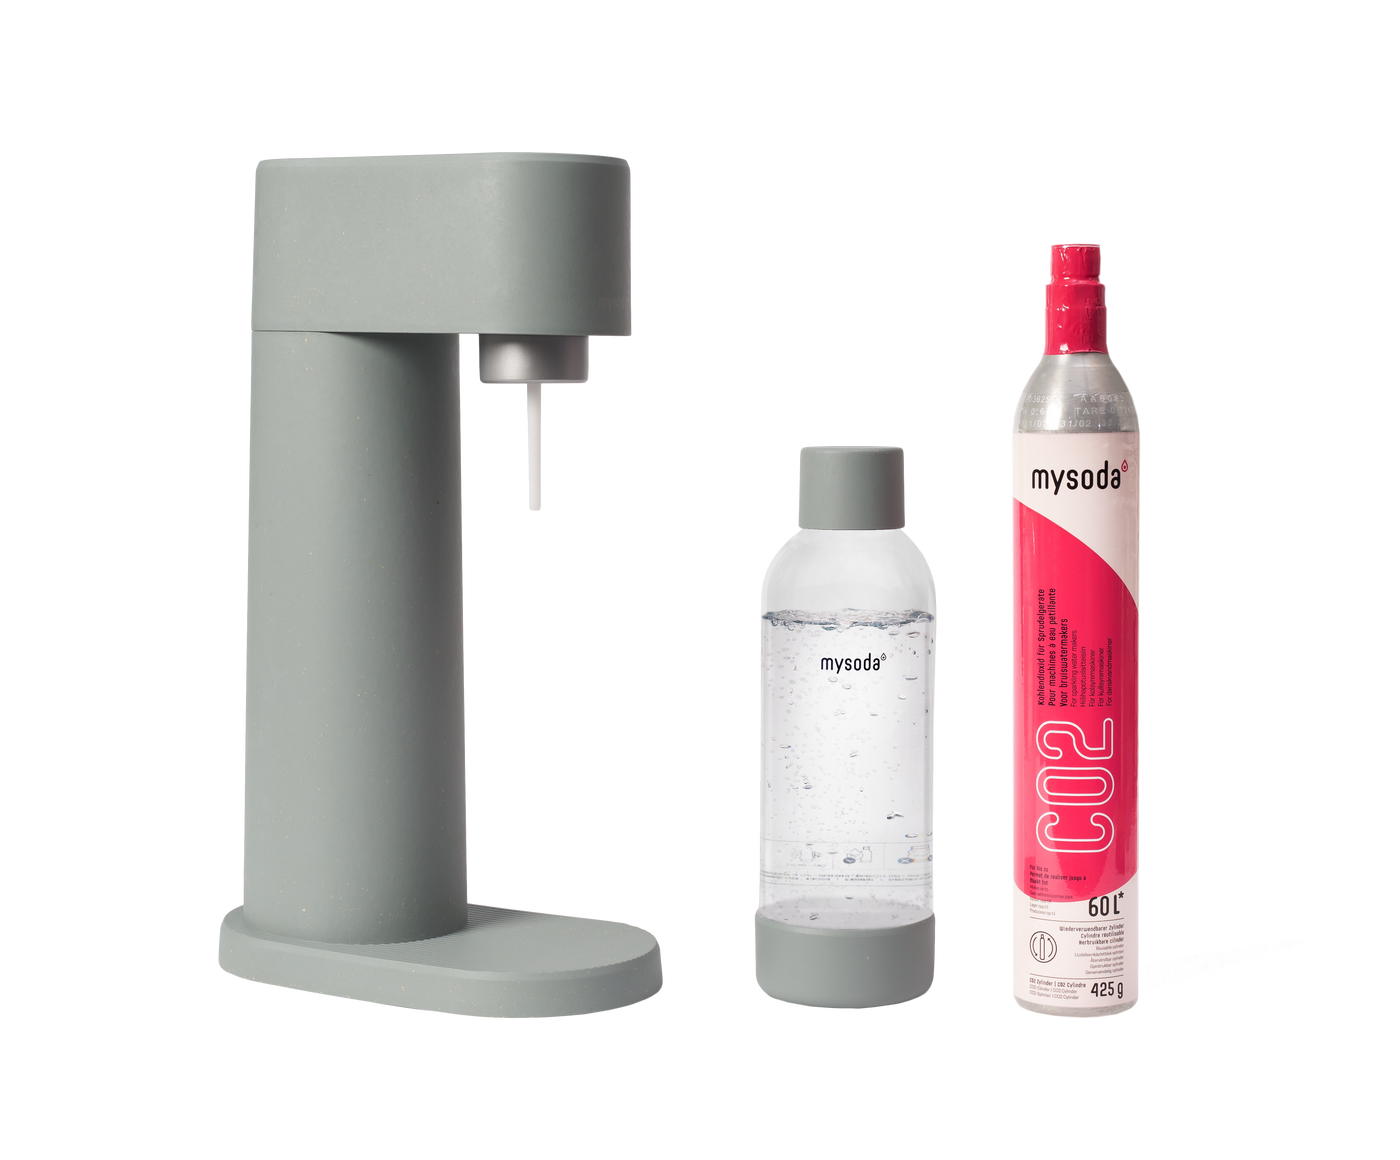 Pigeon Mysoda Woody sparkling water maker with bottle and co2 cylinder